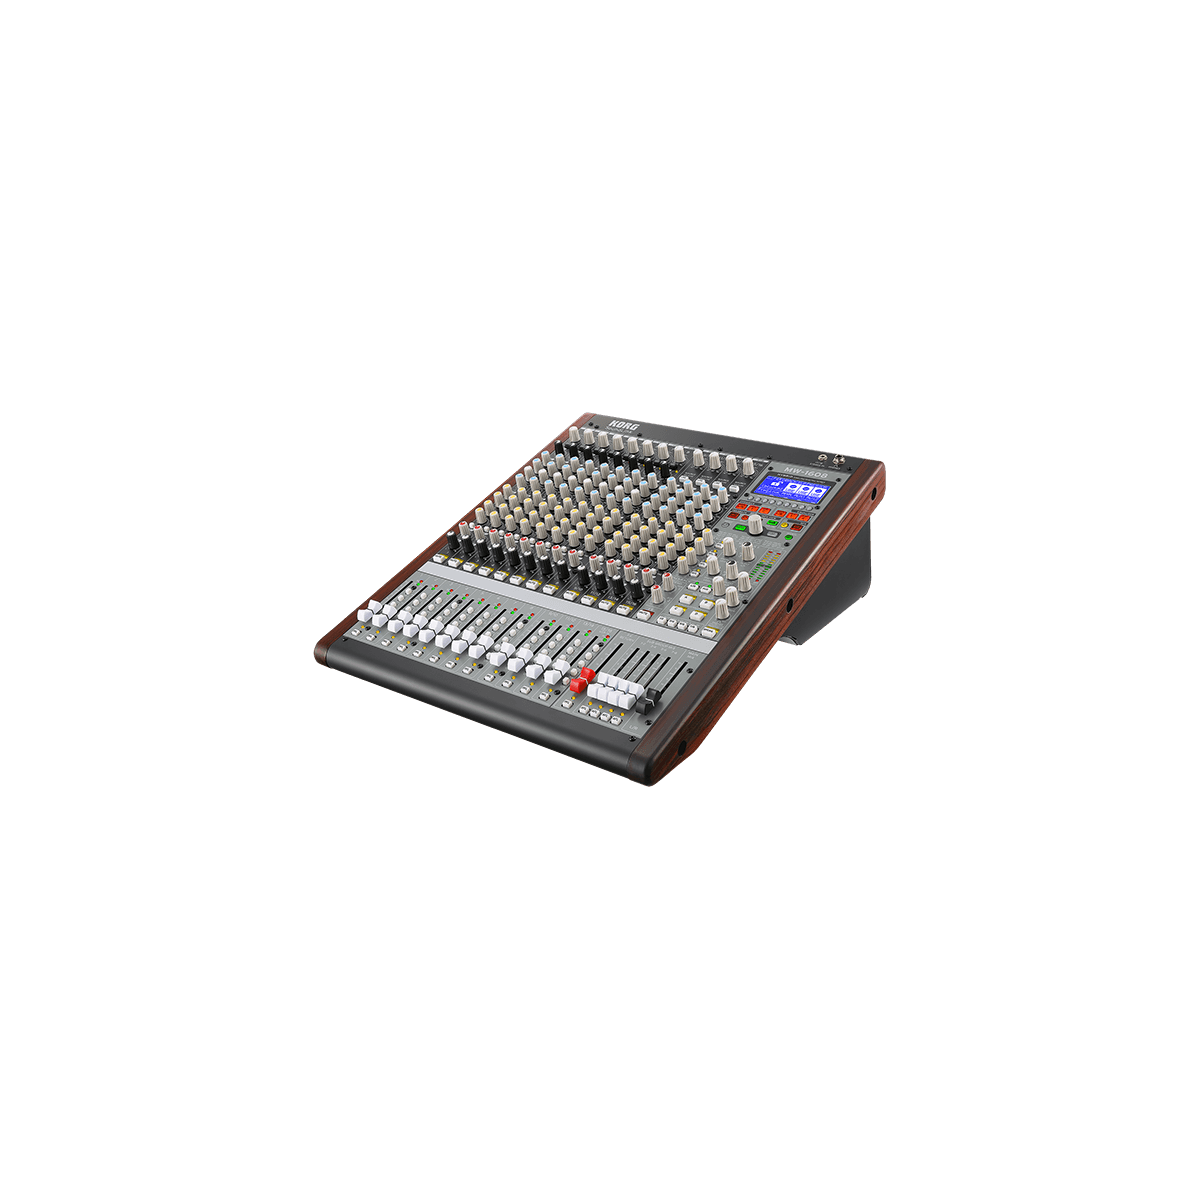 Consoles analogiques - Korg - MW-1608